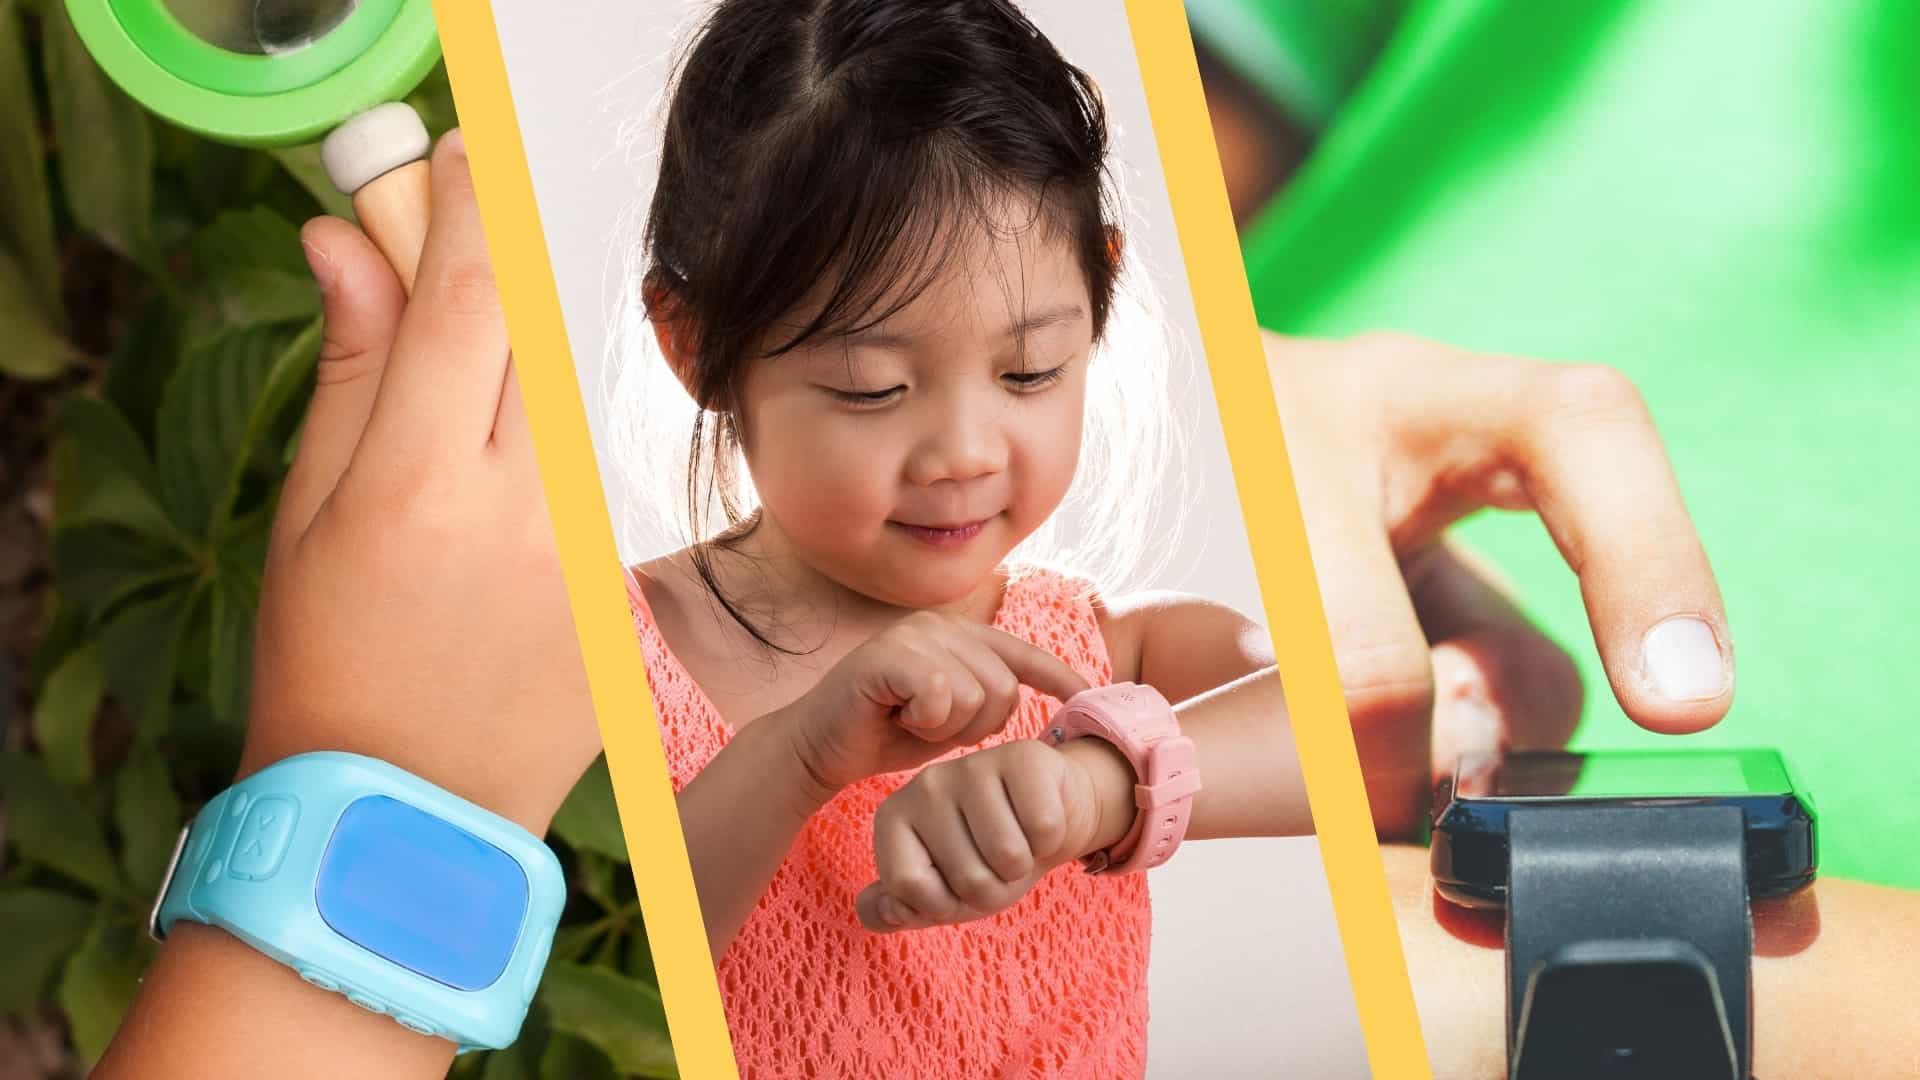 7 Best Smartwatches For Kids Tested: These Are The Results